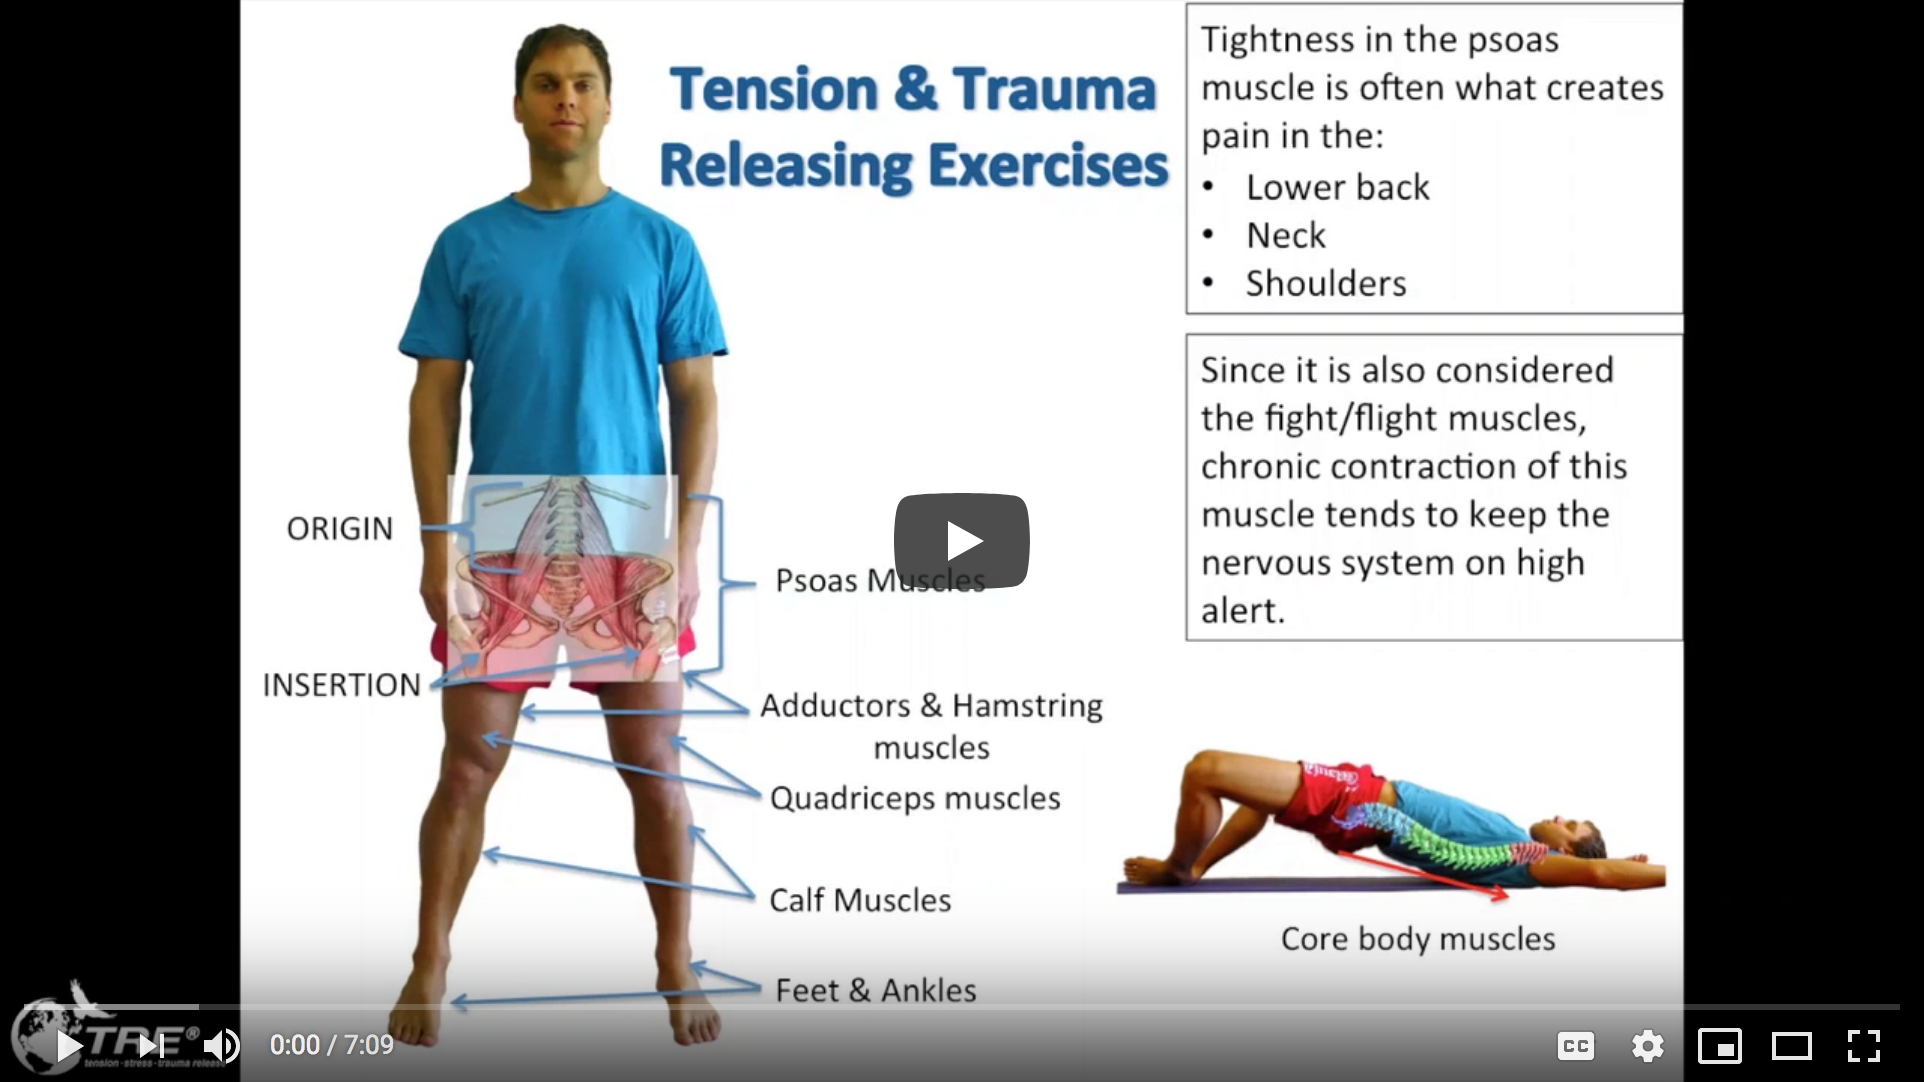 TRE (Tension and Trauma Release Exercises)